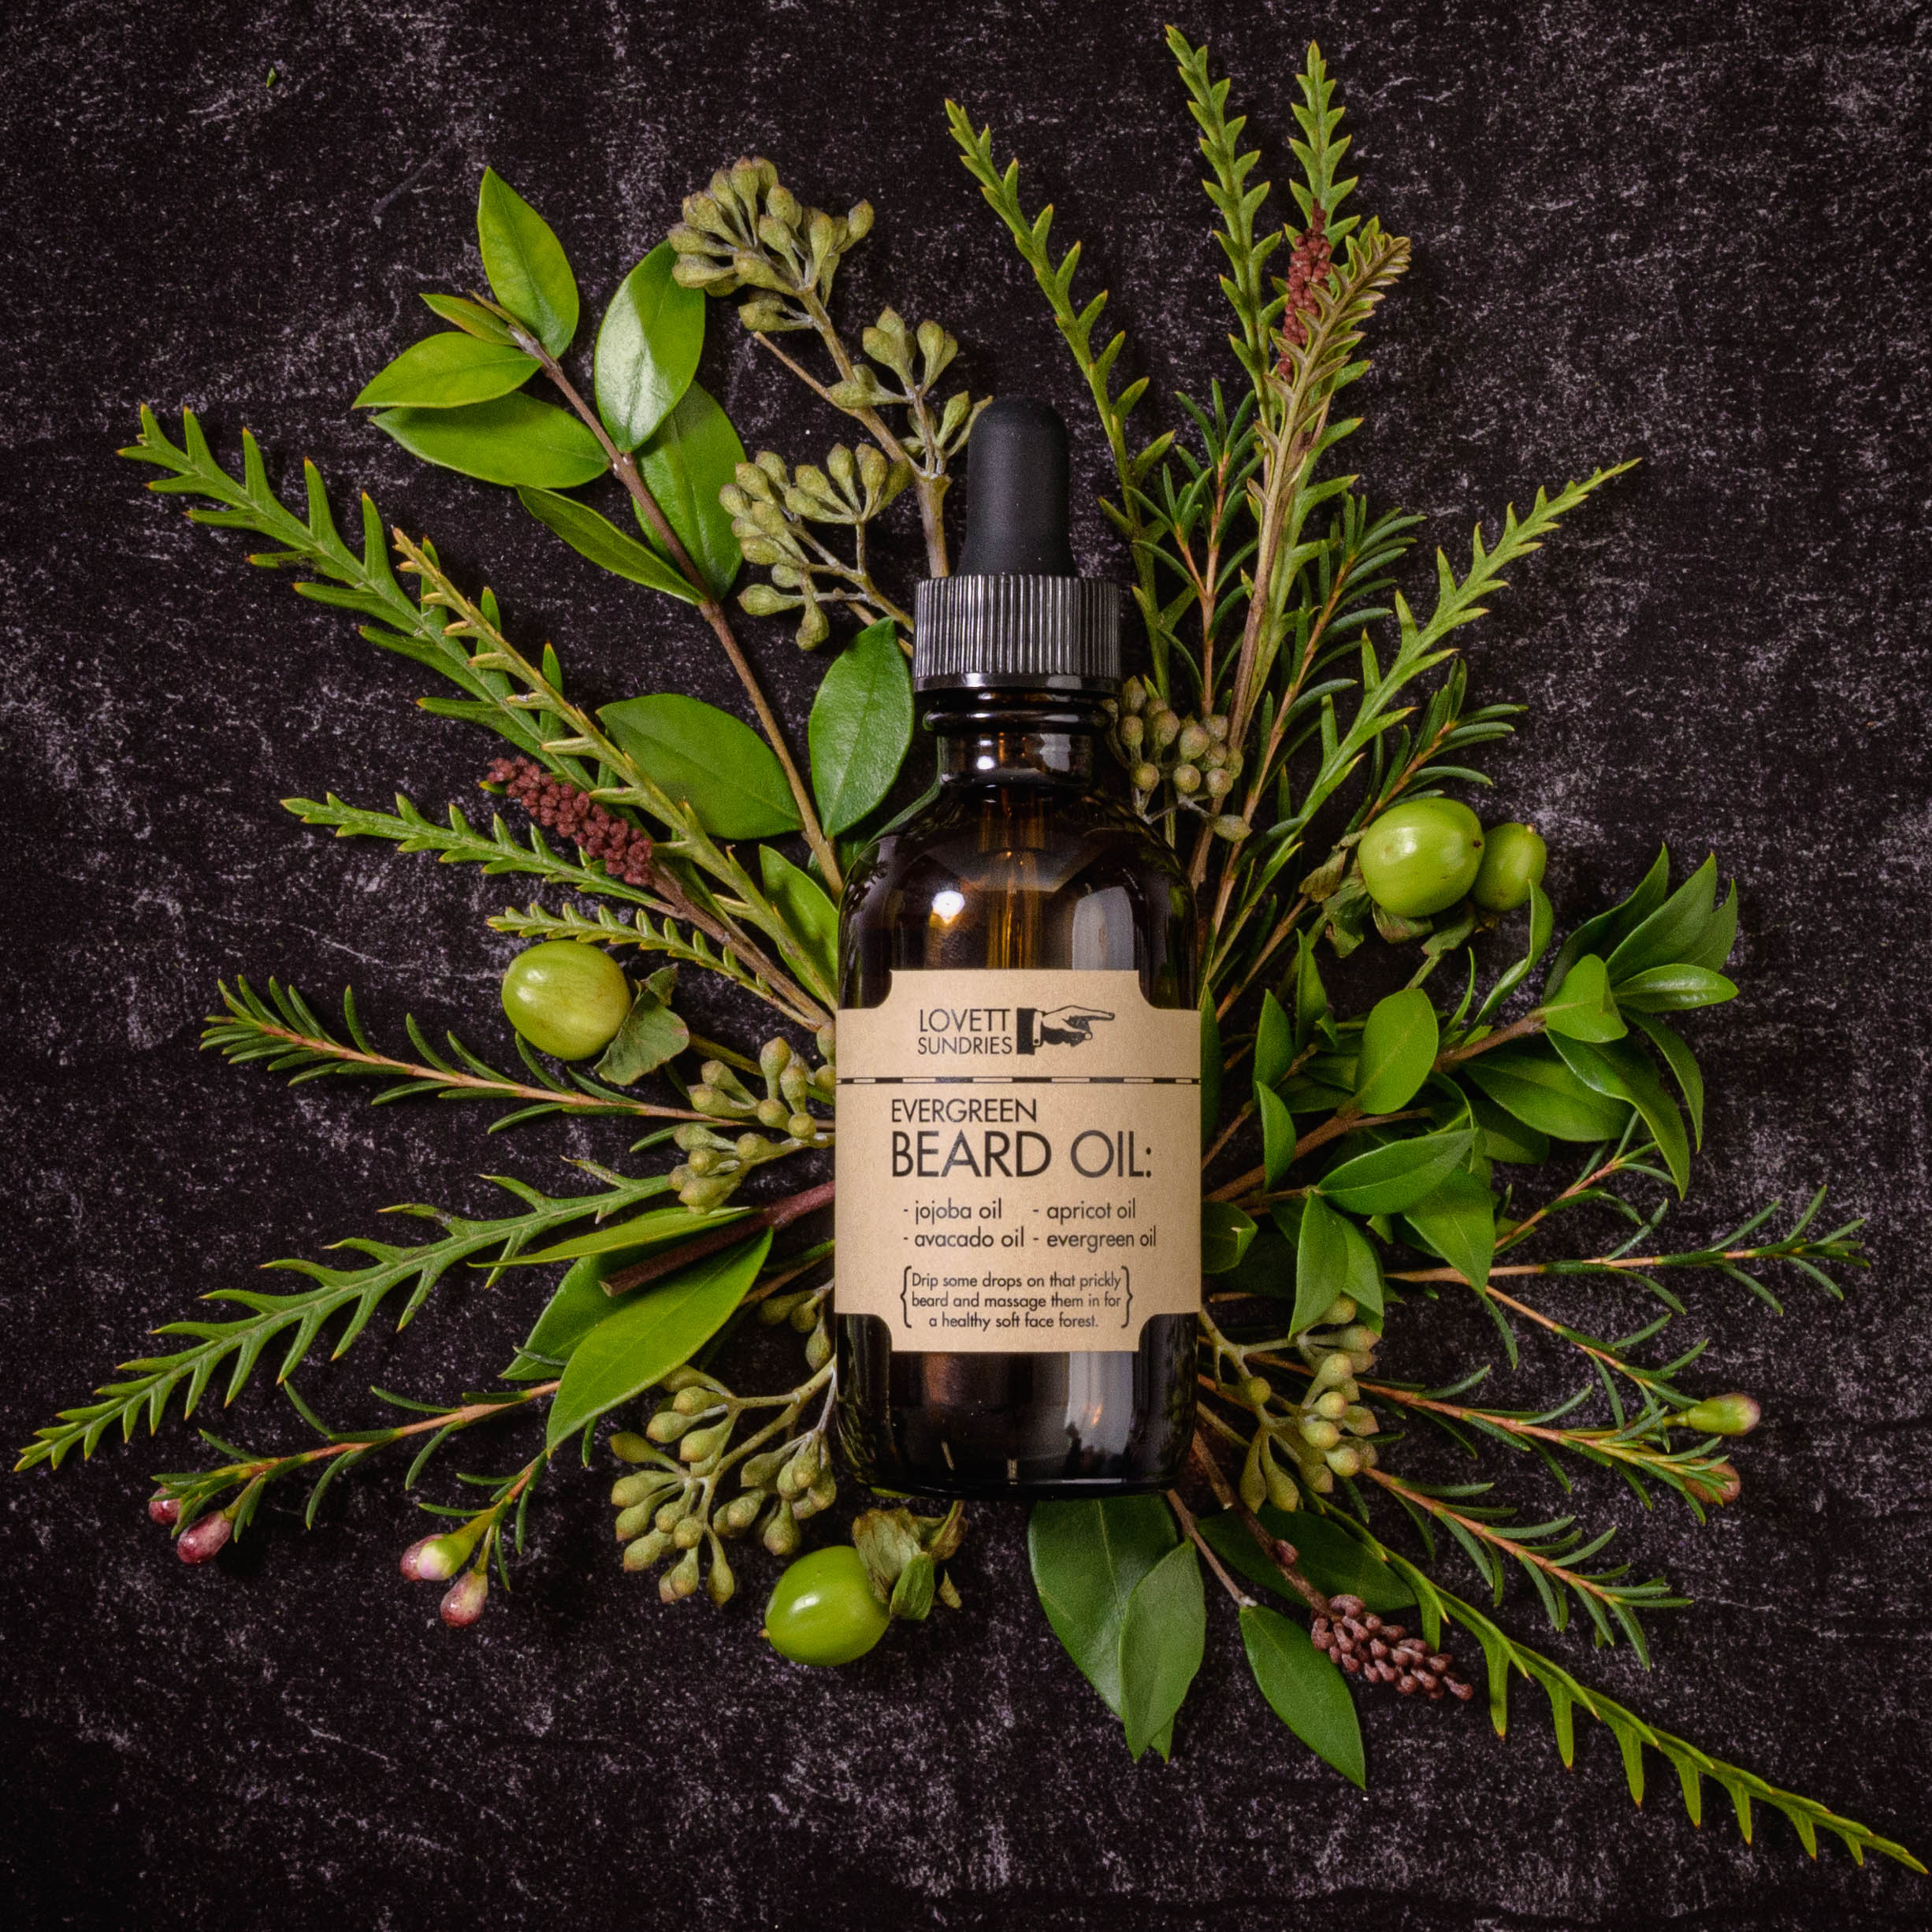 Bottle of Evergreen Beard Oil laying on a bed of refreshing flowers and botanicals.